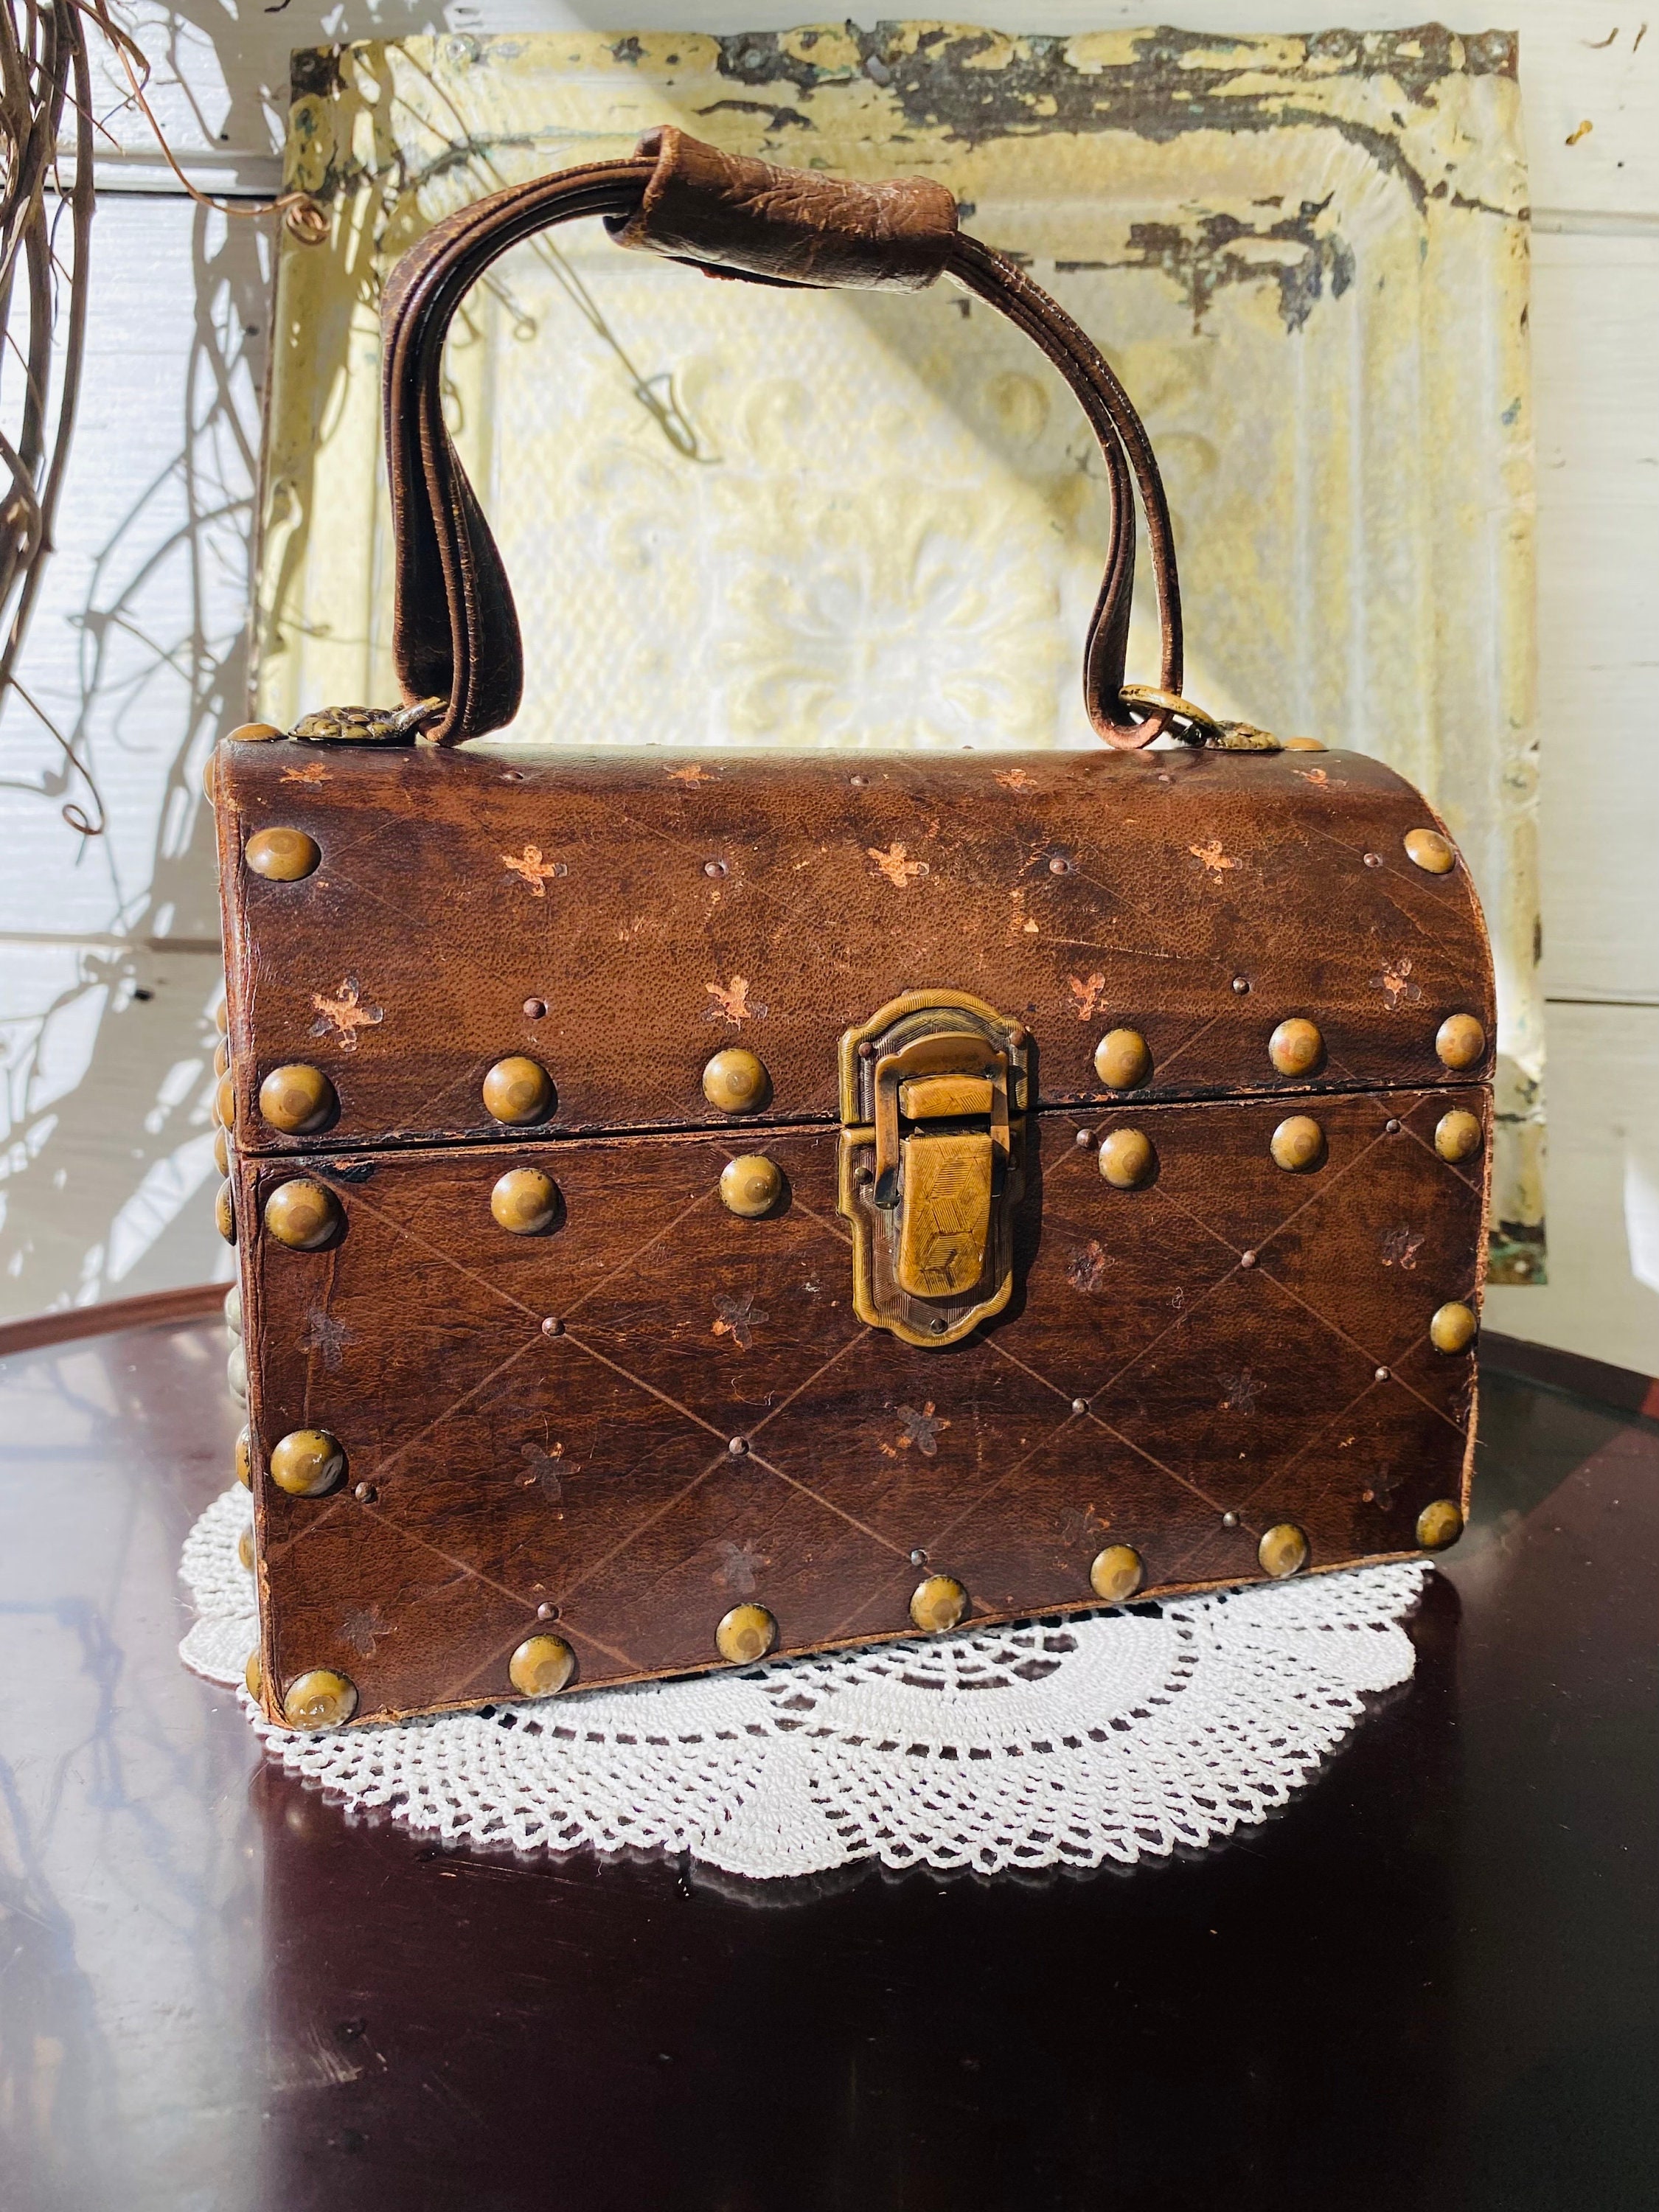 Kimberley Trunk Ostrich Leather Bag for Sale Online